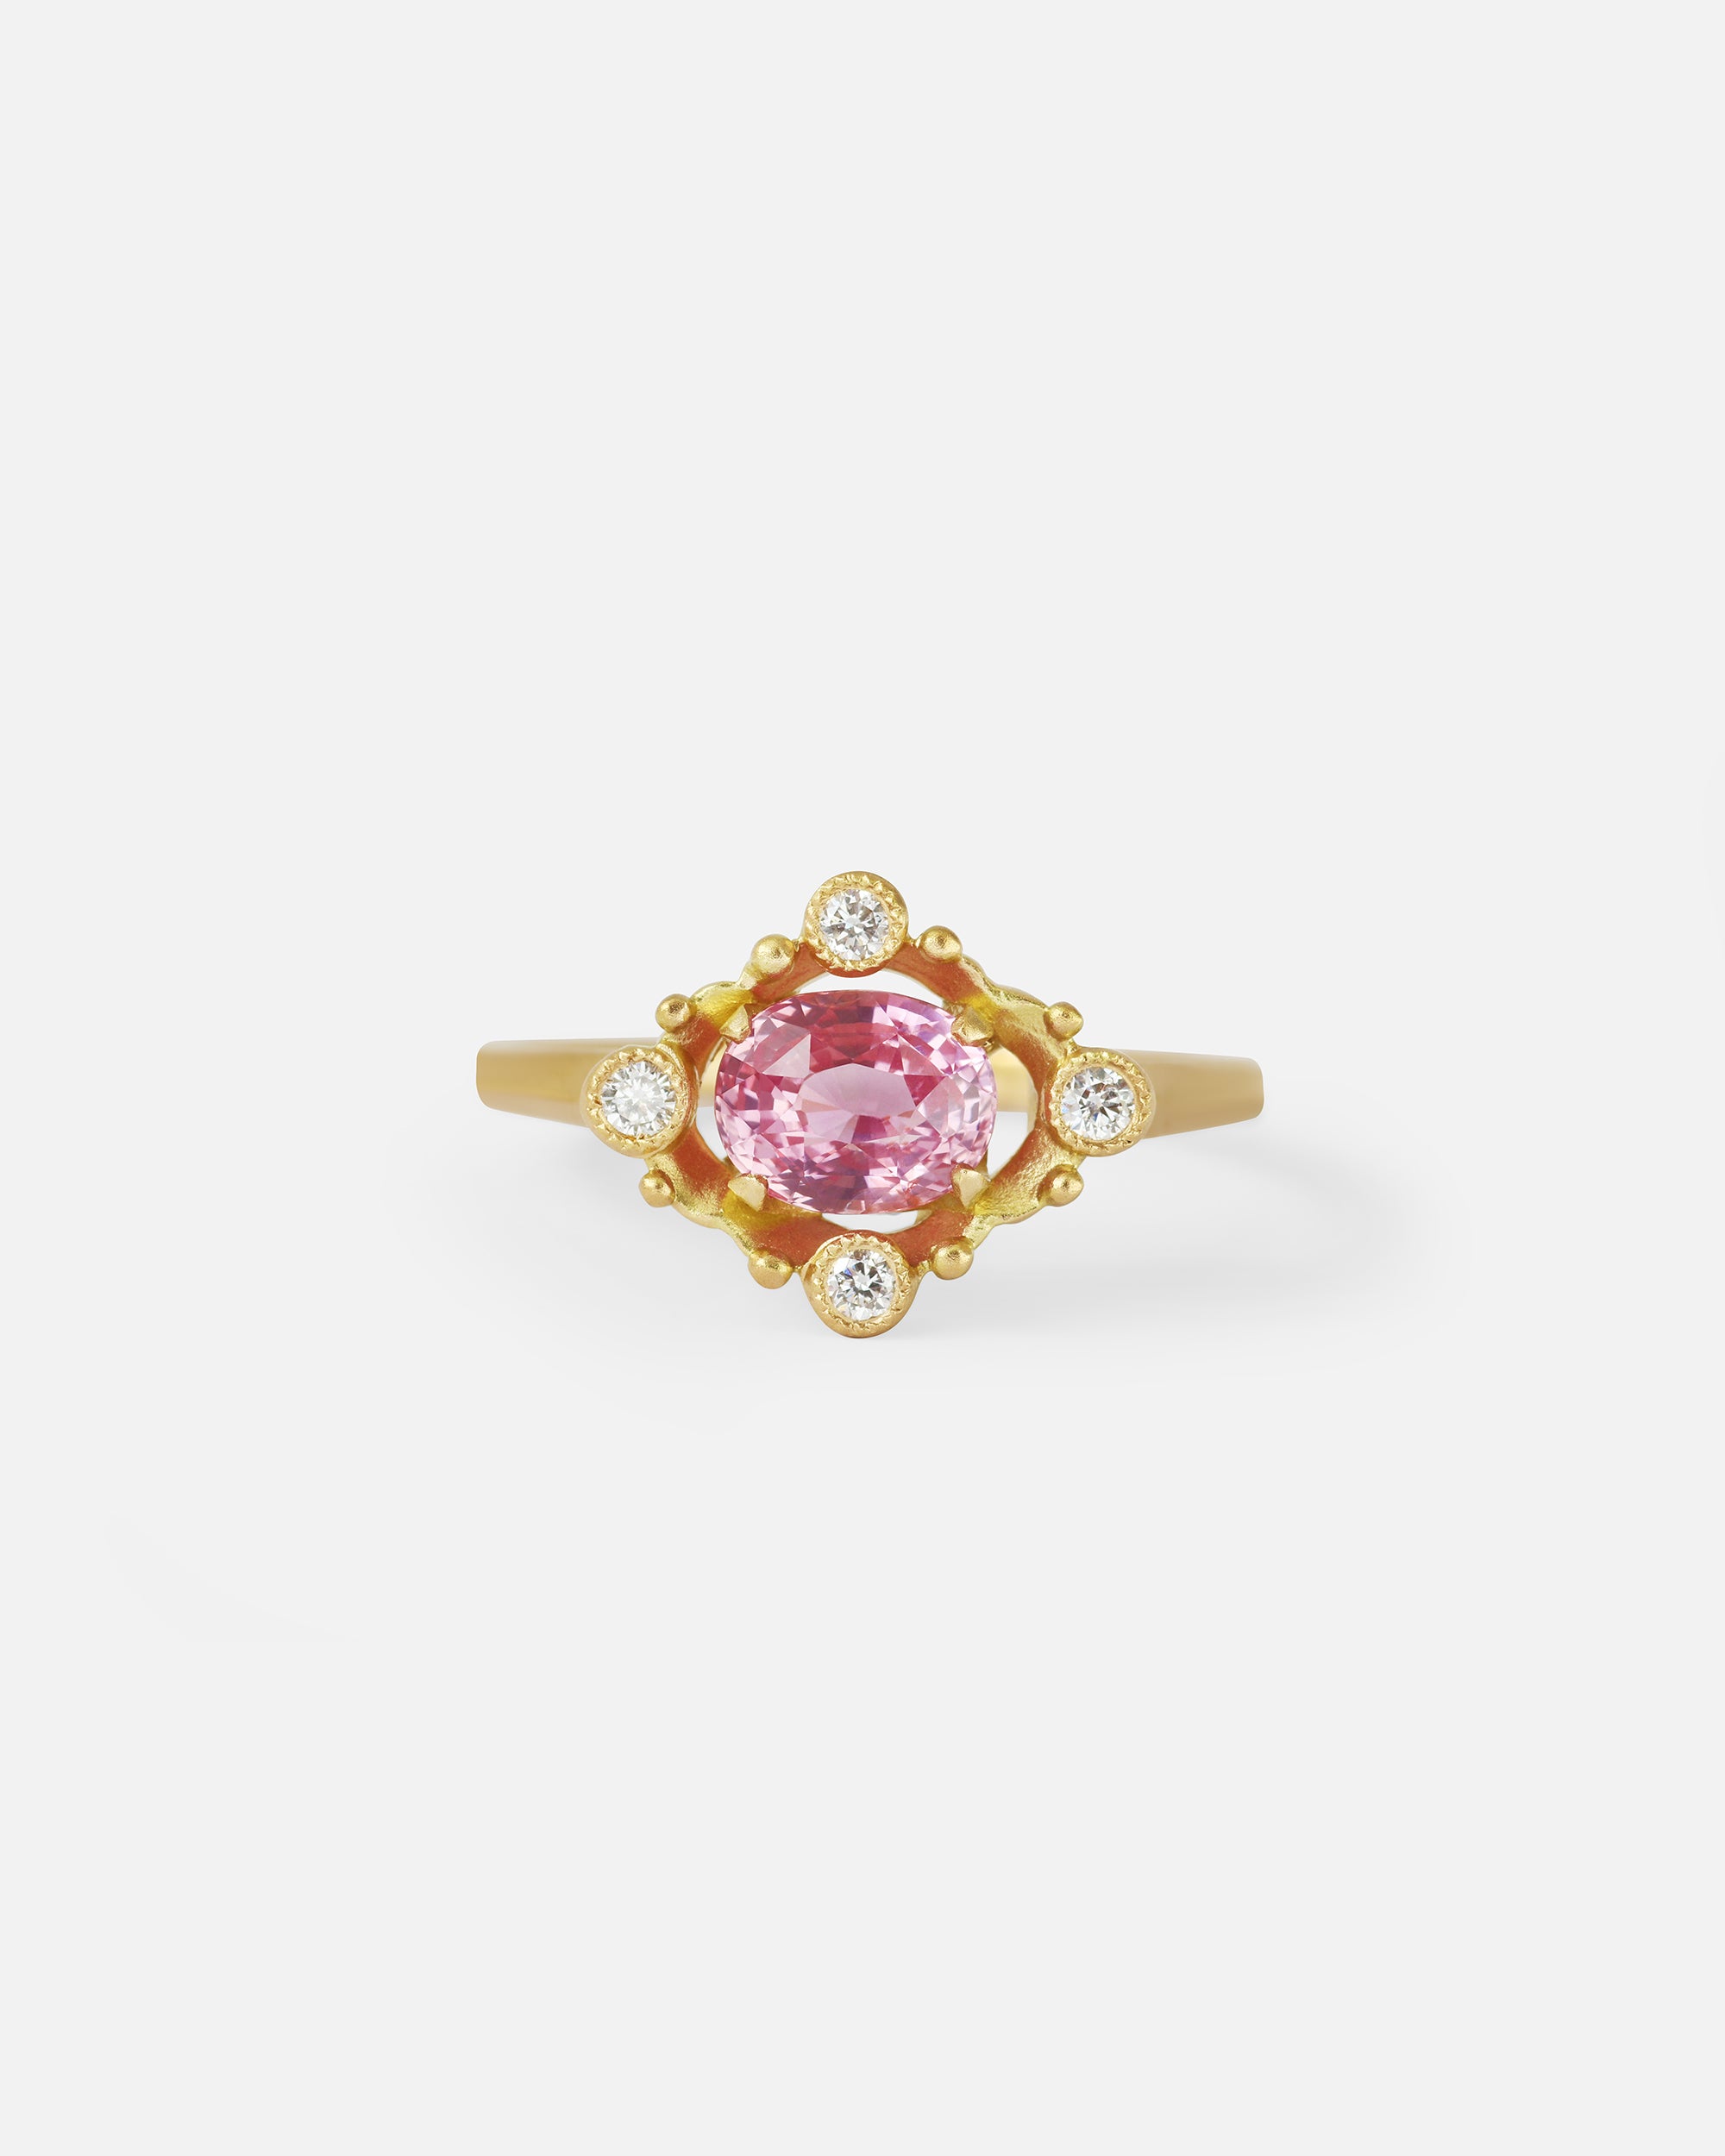 Melee Halo / E15 By Hiroyo in Engagement Rings Category